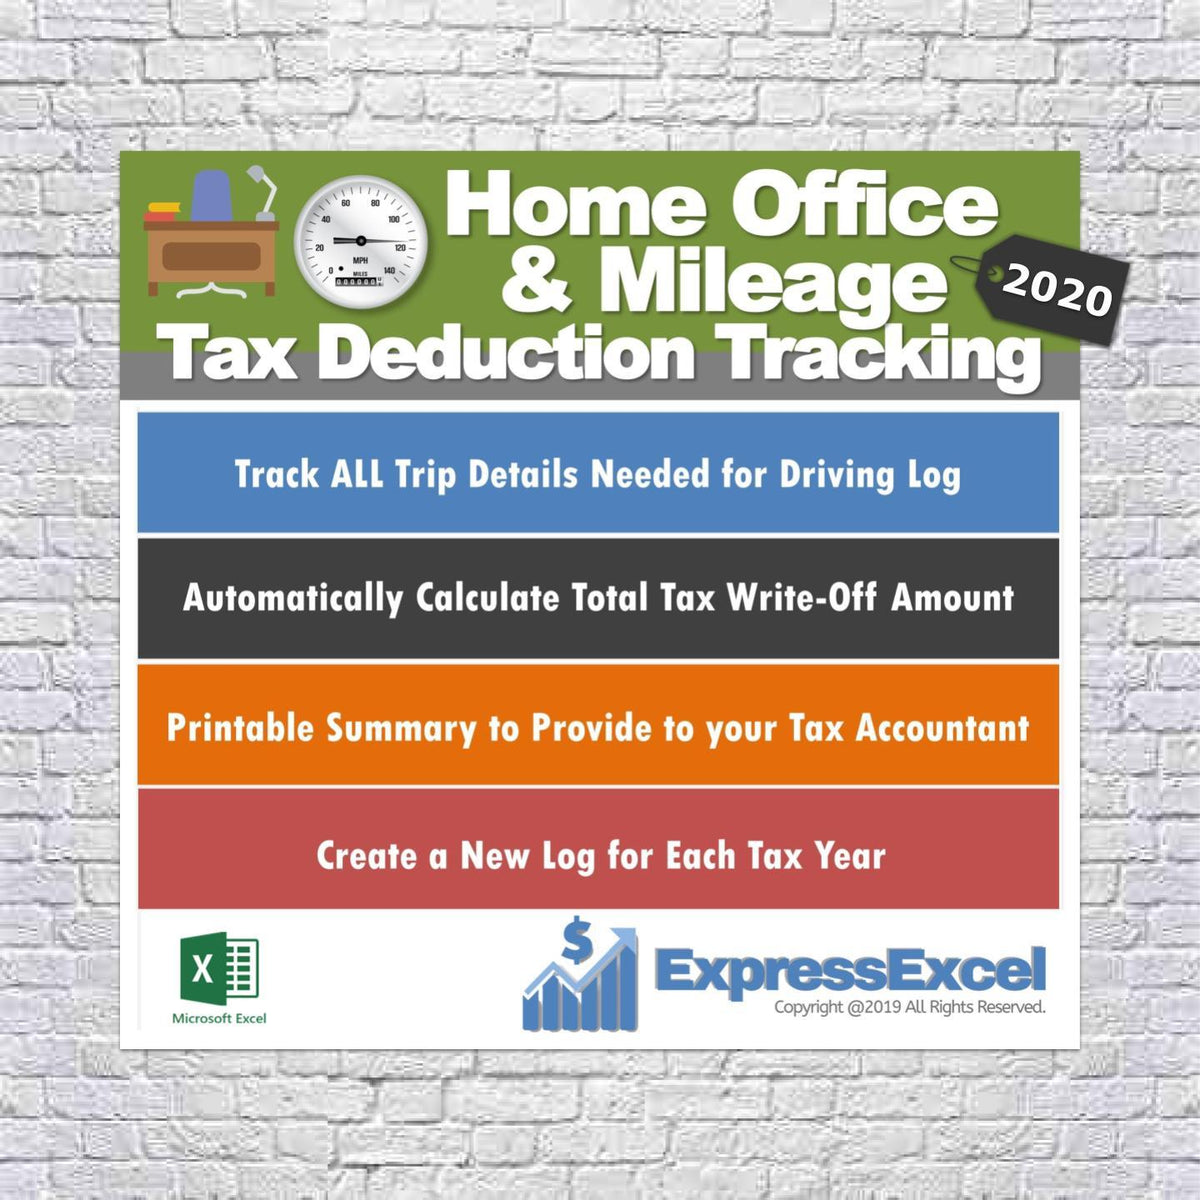 home-office-tax-deductions-mileage-tracking-log-2020